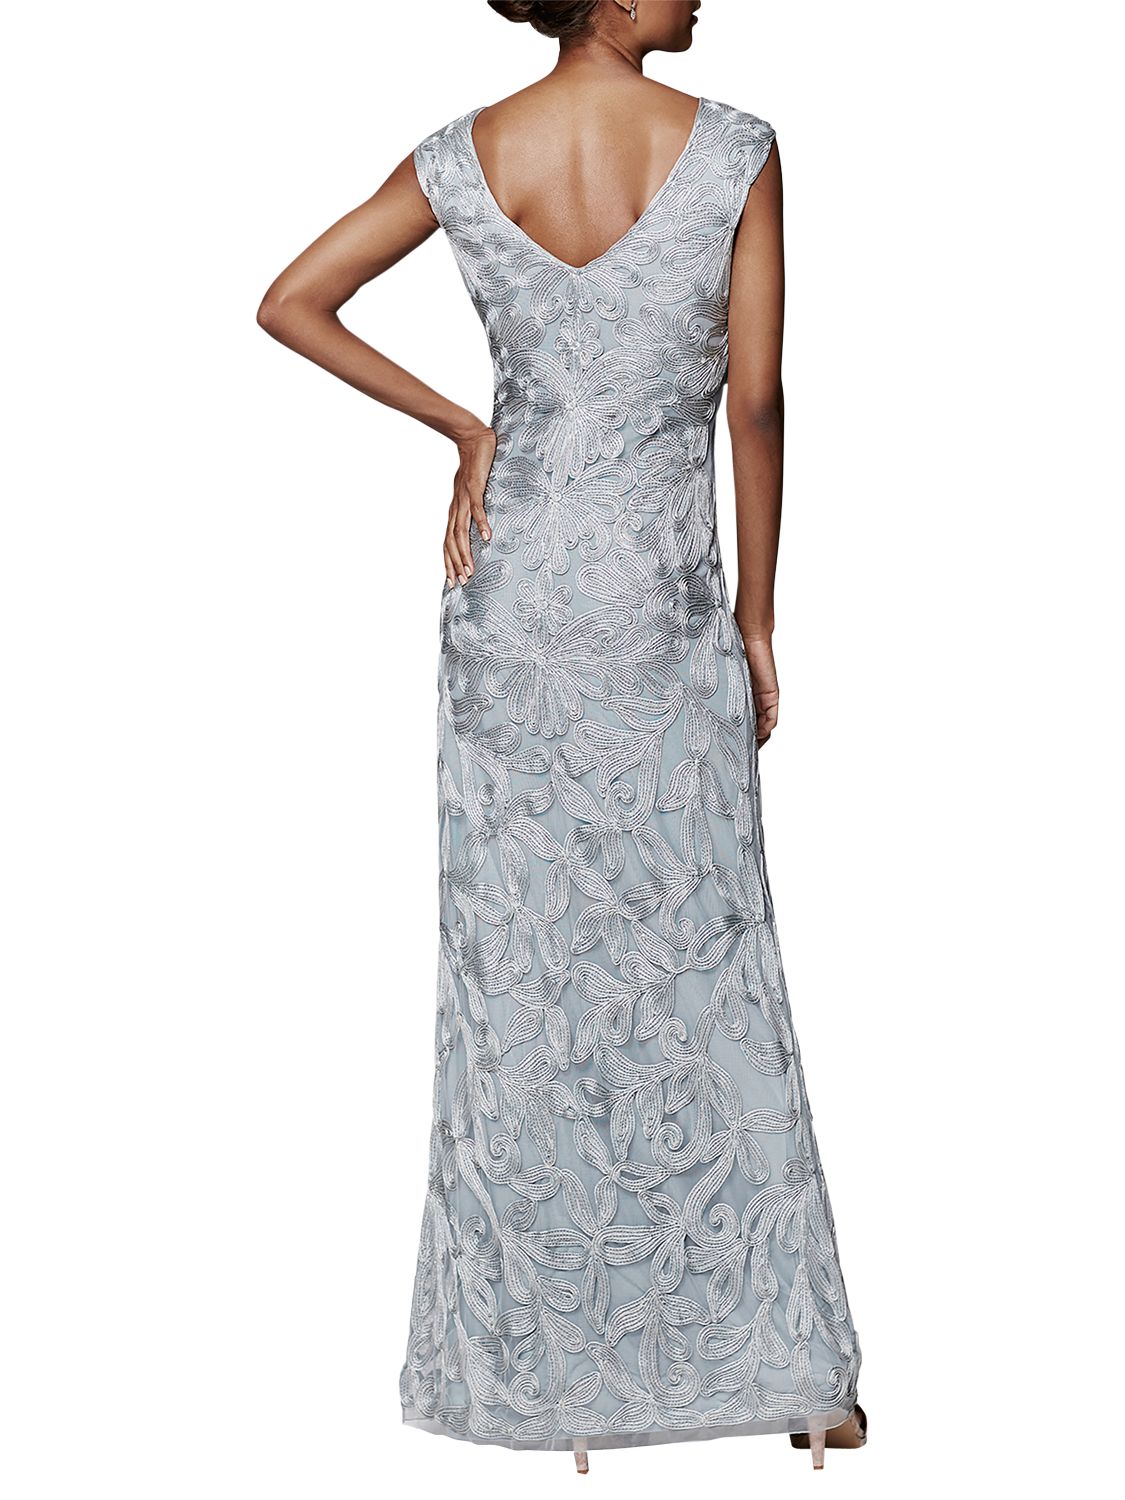 Phase Eight Collection 8 Serenna Tapework Dress, Pale Blue